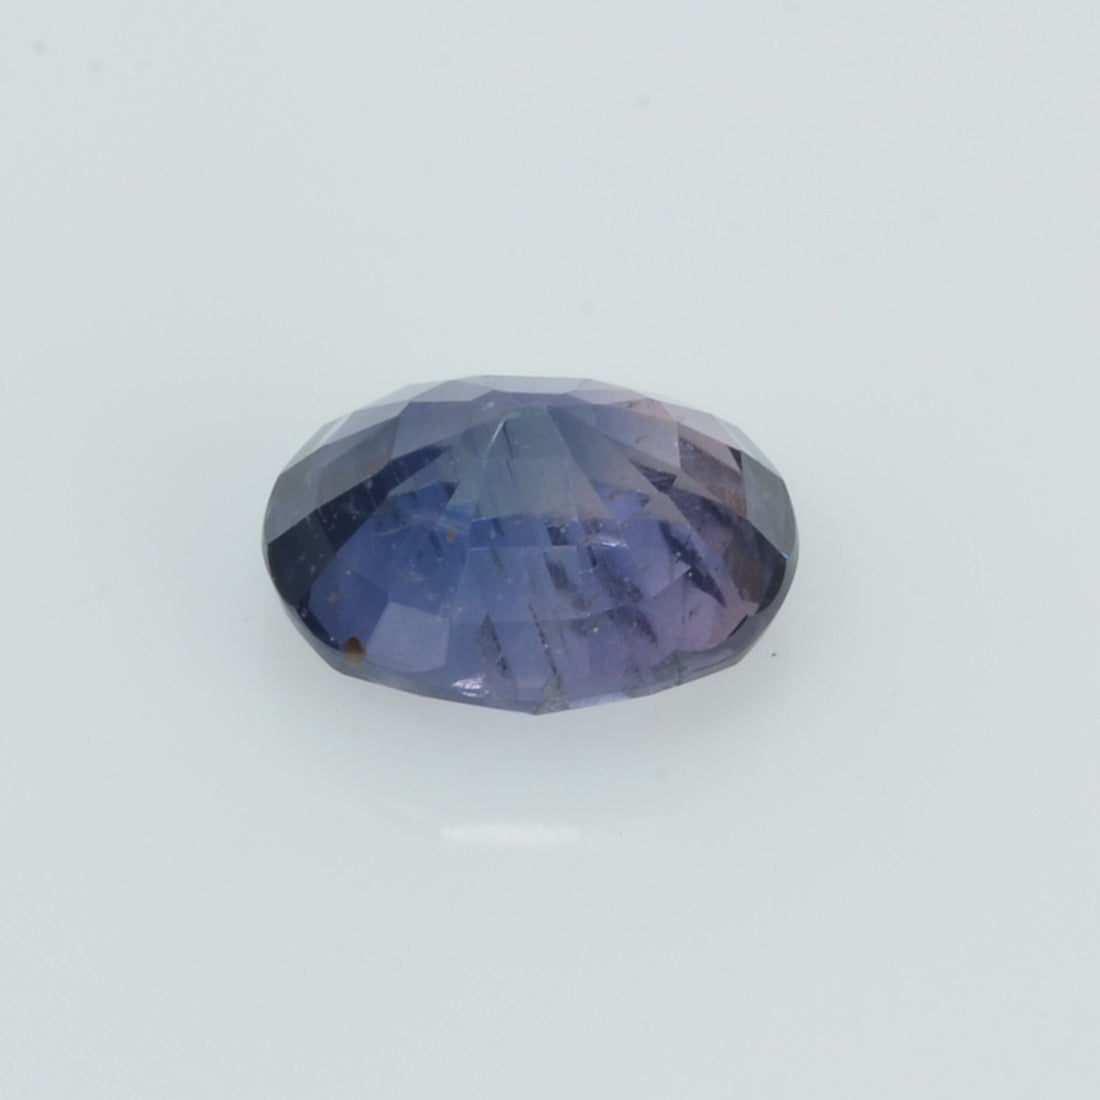 1.35 cts Natural Purple Sapphire Loose Gemstone Oval Cut Certified